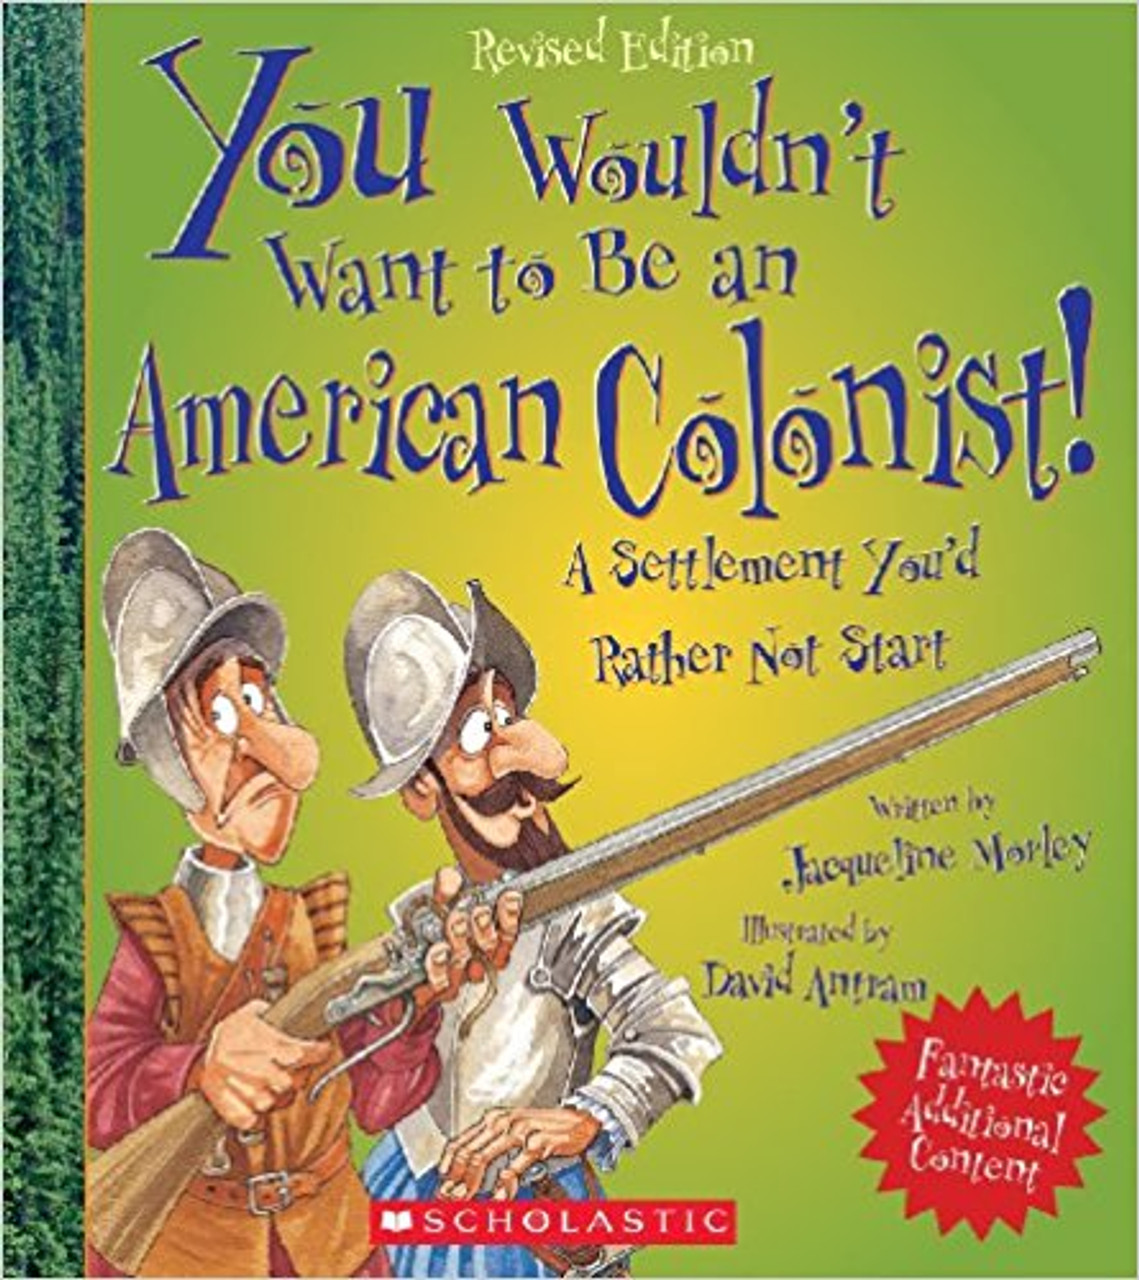 You Wouldn't Want to Be an American Colonist! by Jacqueline Morley